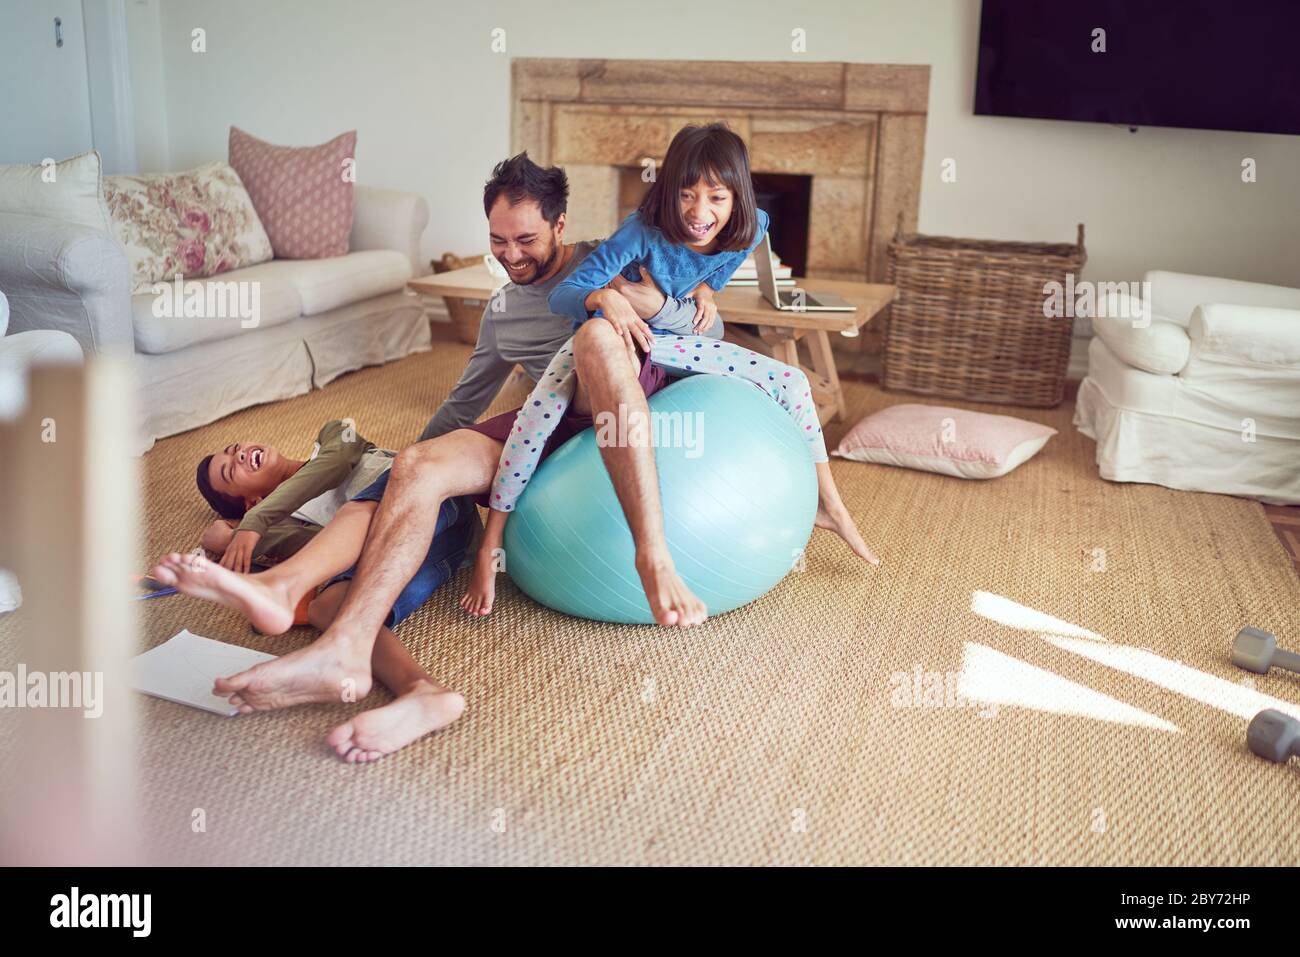 Playful father and kids on fitness ball in living room Stock Photo